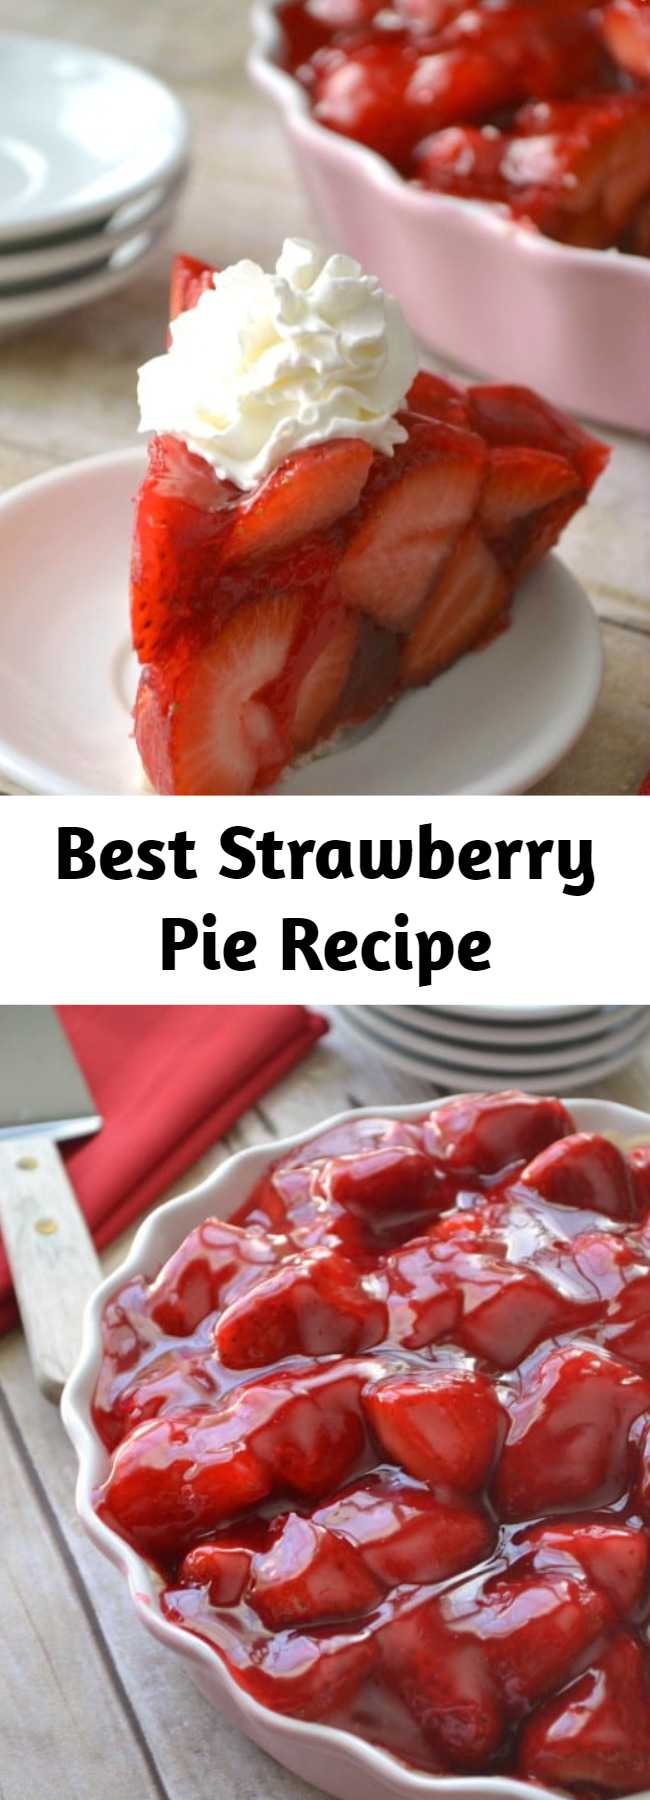 Best Strawberry Pie Recipe - This Strawberry Pie has fresh strawberries mounded high in a rich, buttery crust. A little (or big) slice of delicious. The perfect summer dessert and my favorite strawberry pie!